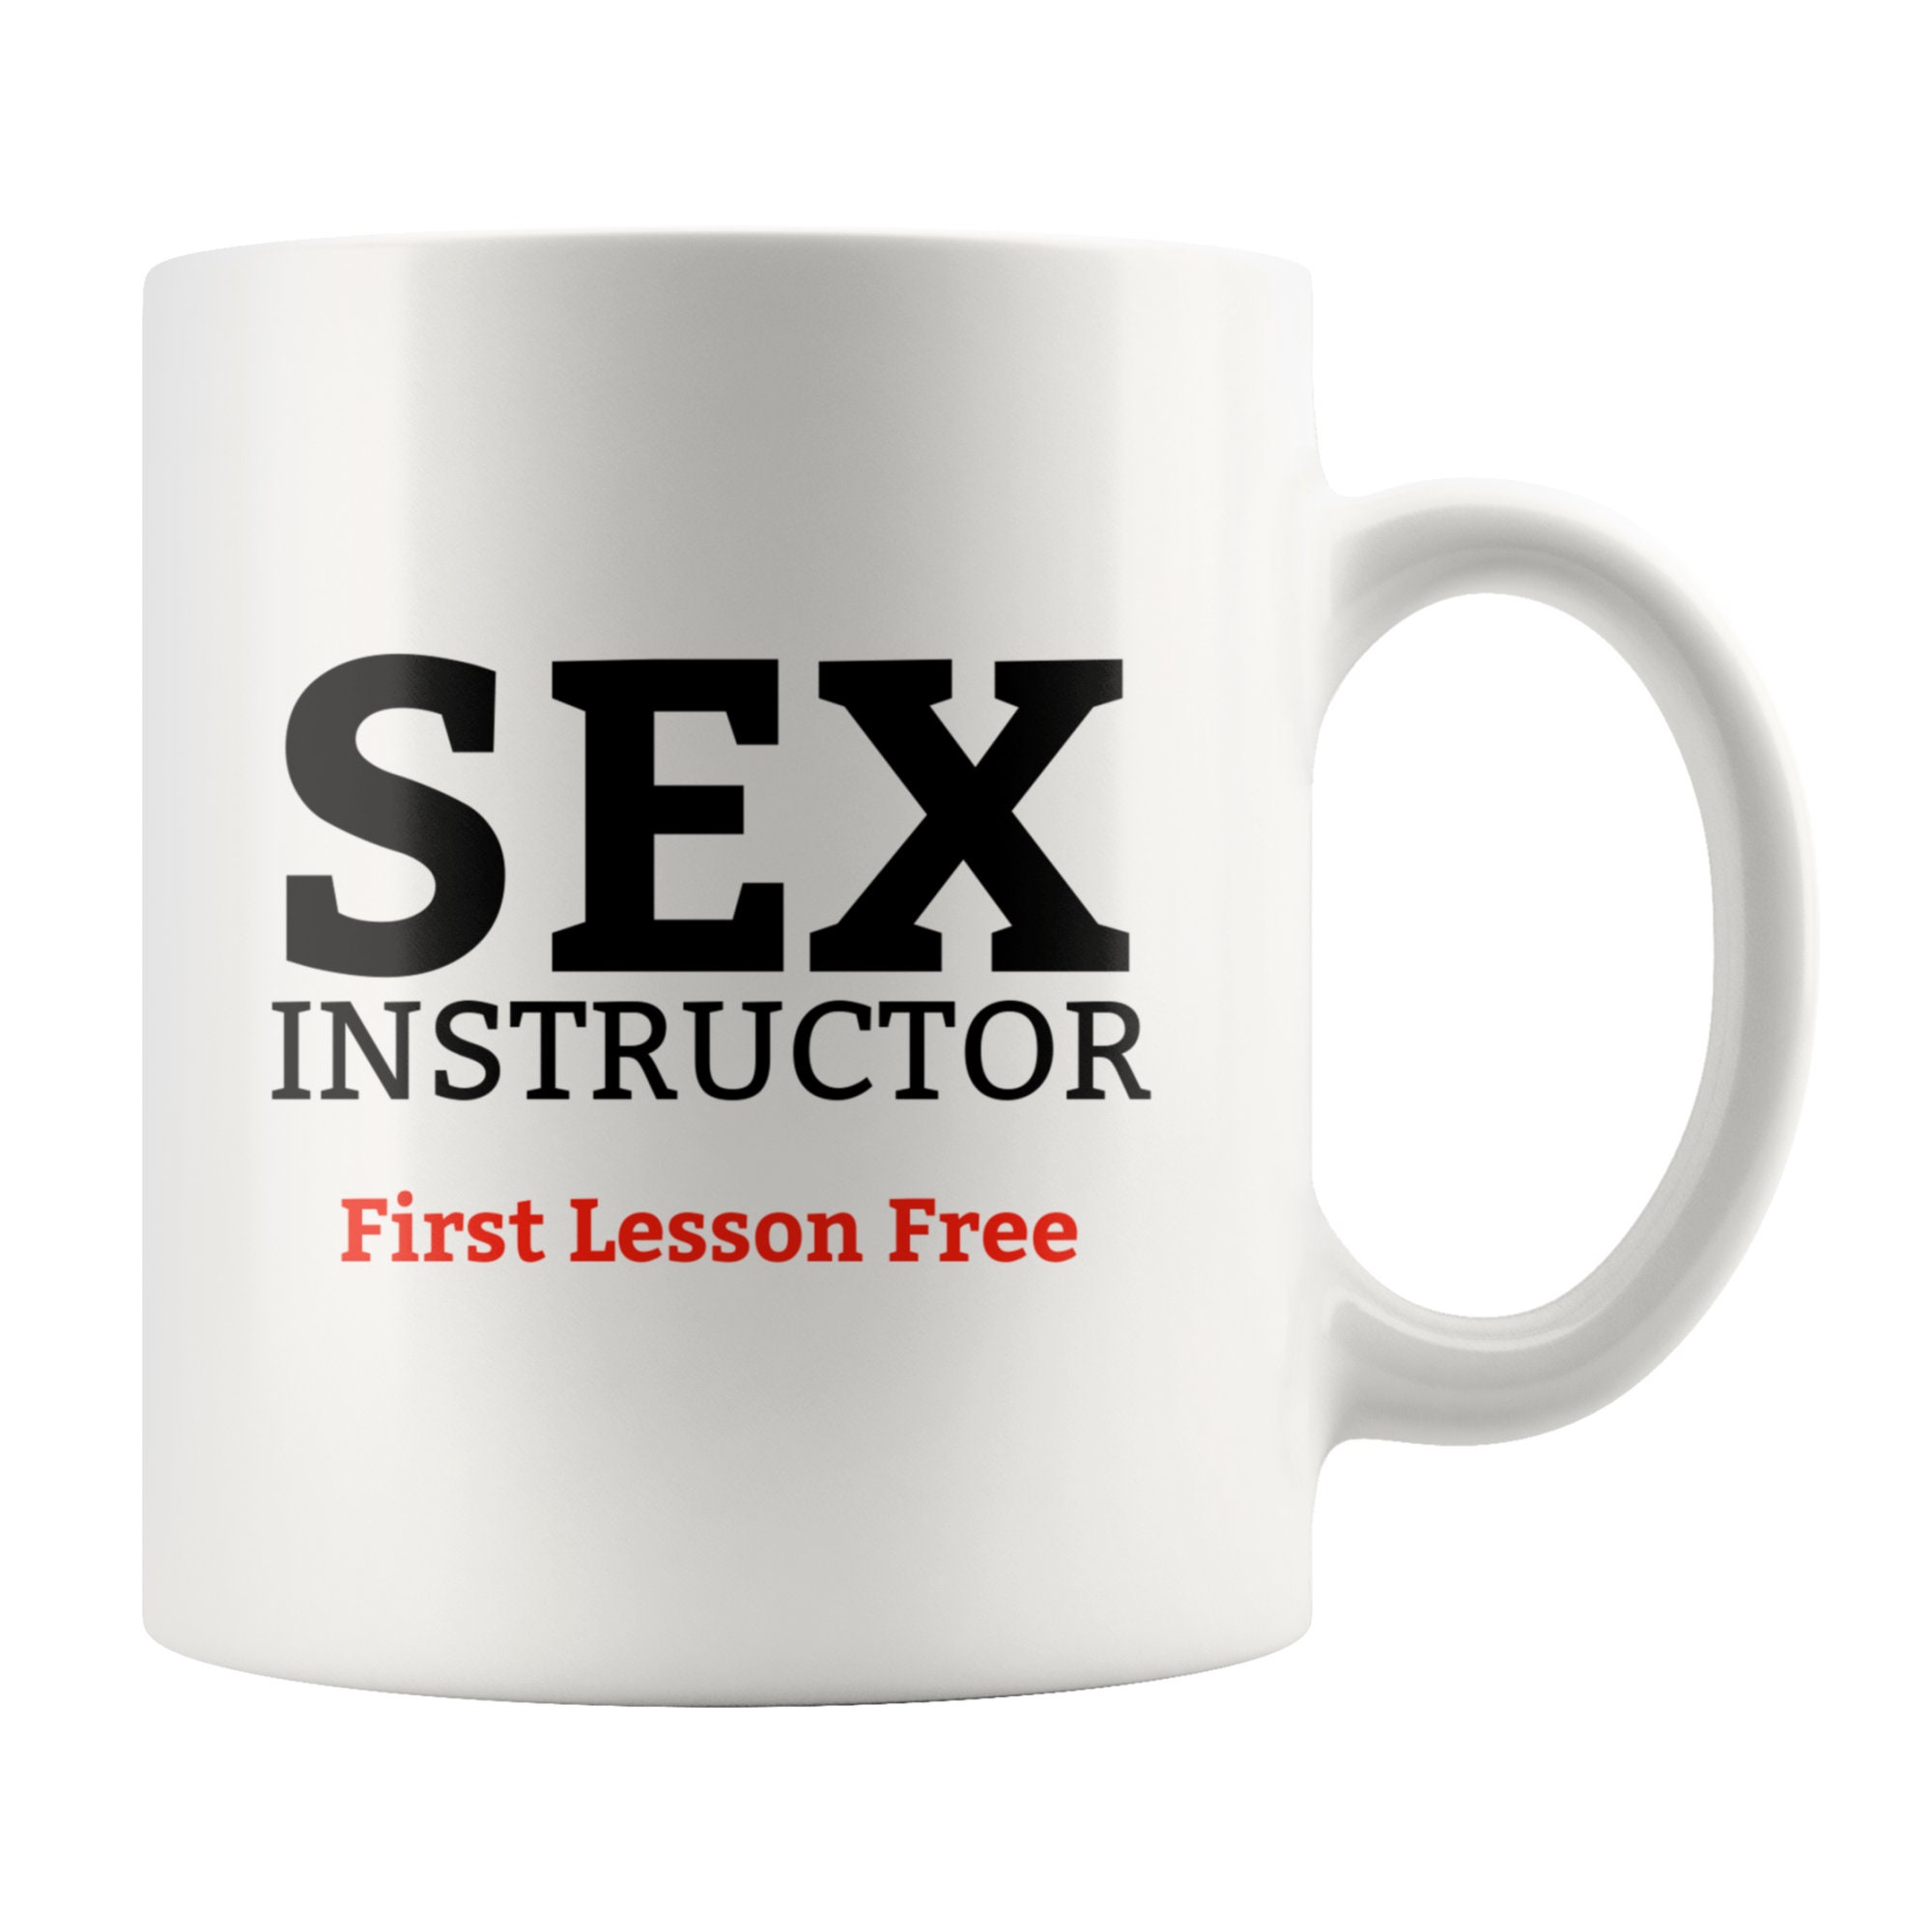 SEX INSTRUCTOR First Lesson Free-happy Anniversary